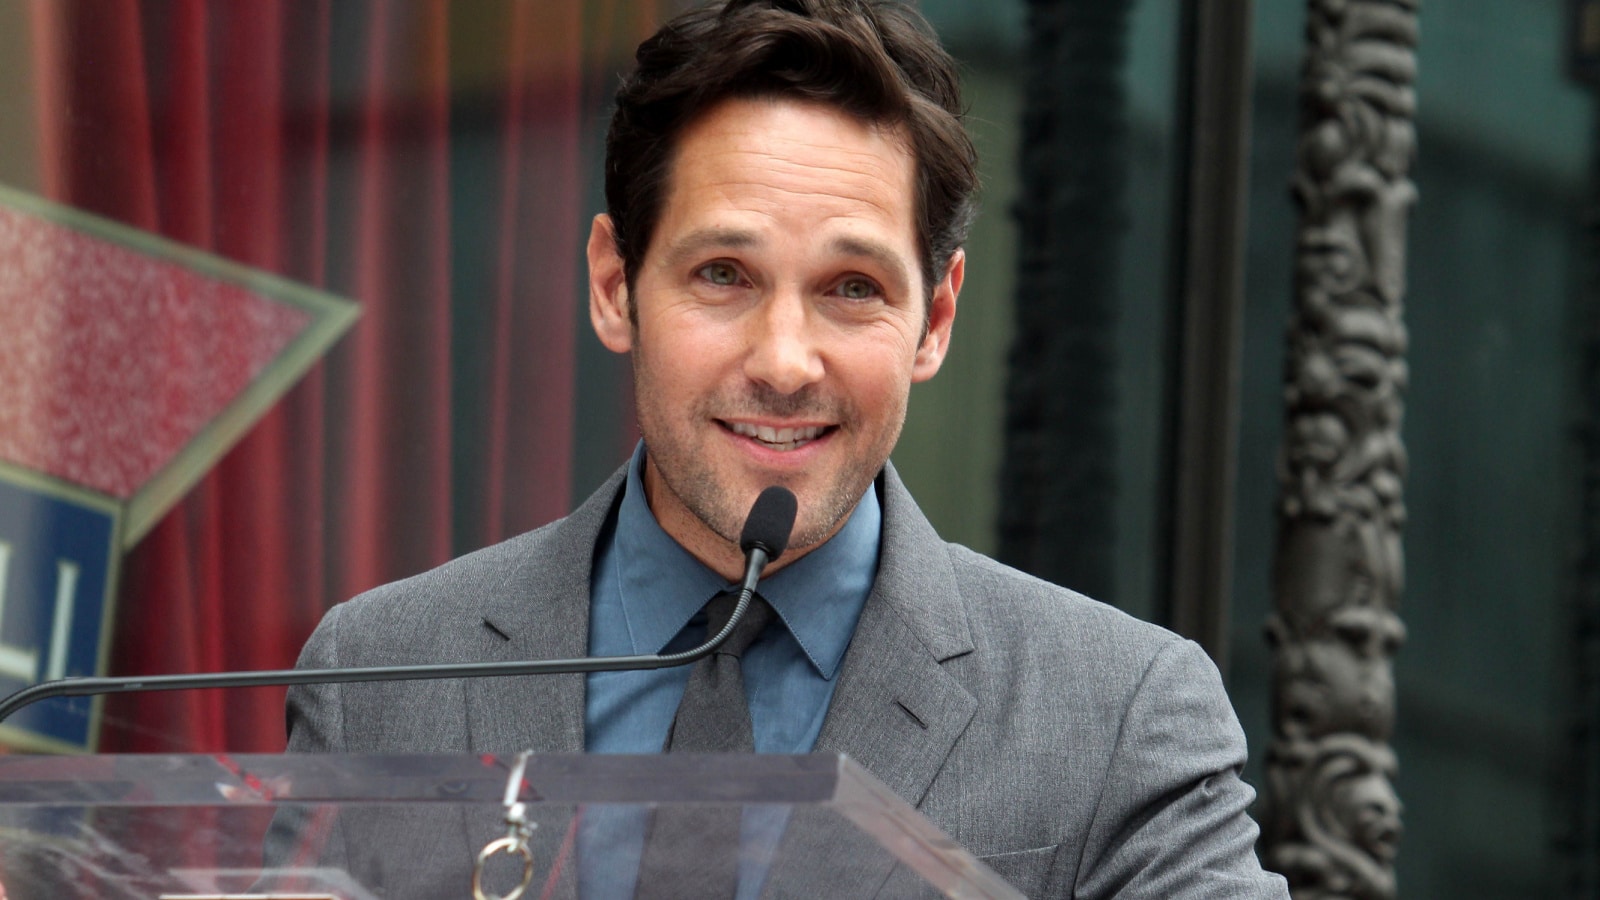 LOS ANGELES - JUL 1: Paul Rudd at the Paul Rudd Hollywood Walk of Fame Star Ceremony at the El Capitan Theater Sidewalk on July 1, 2015 in Los Angeles, CA